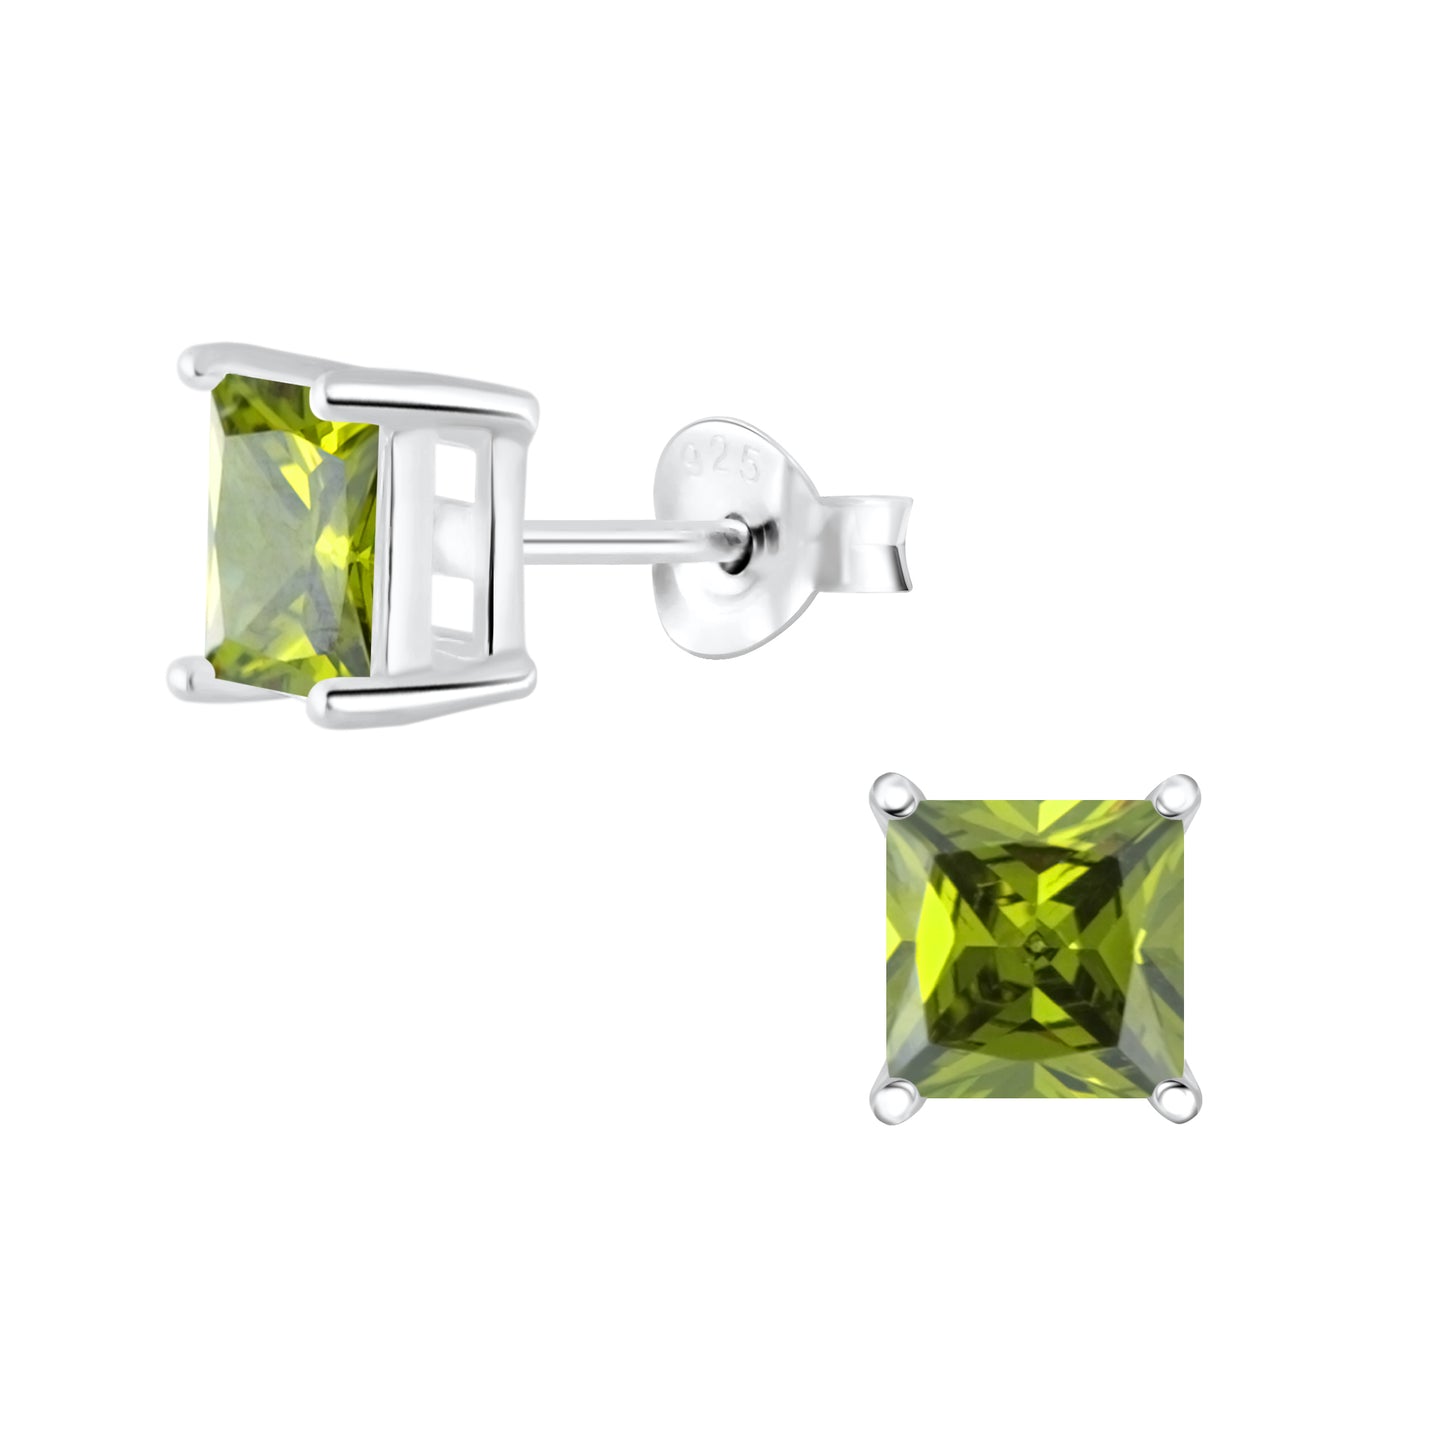 Sterling Silver Square 6mm CZ Stud Earrings